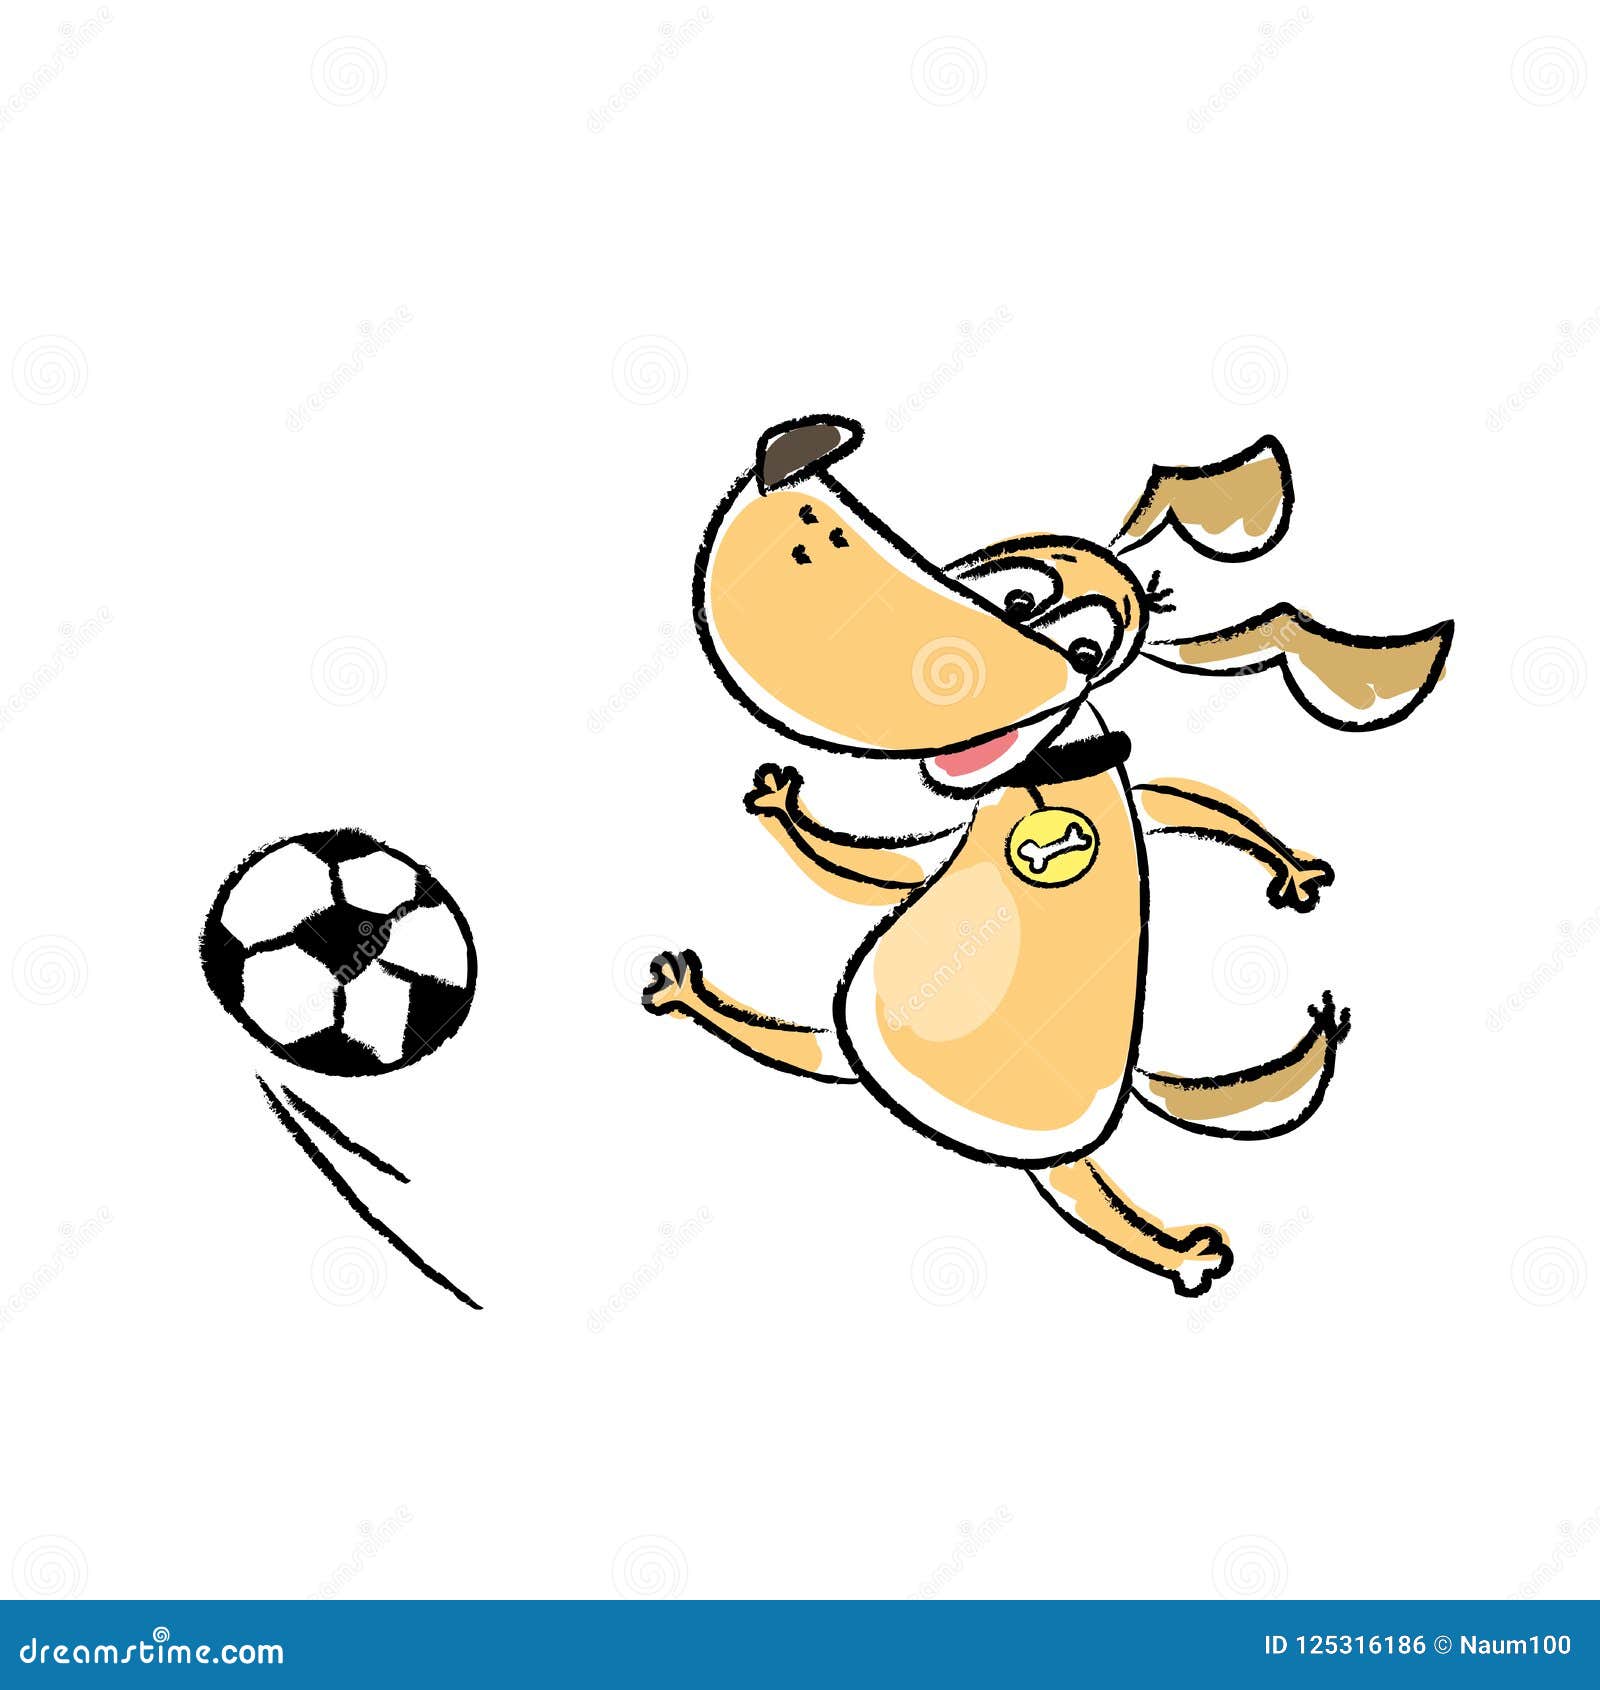 Cute Funny Dog is Playing Football, Stock Vector - Illustration of cartoon,  graphic: 125316186